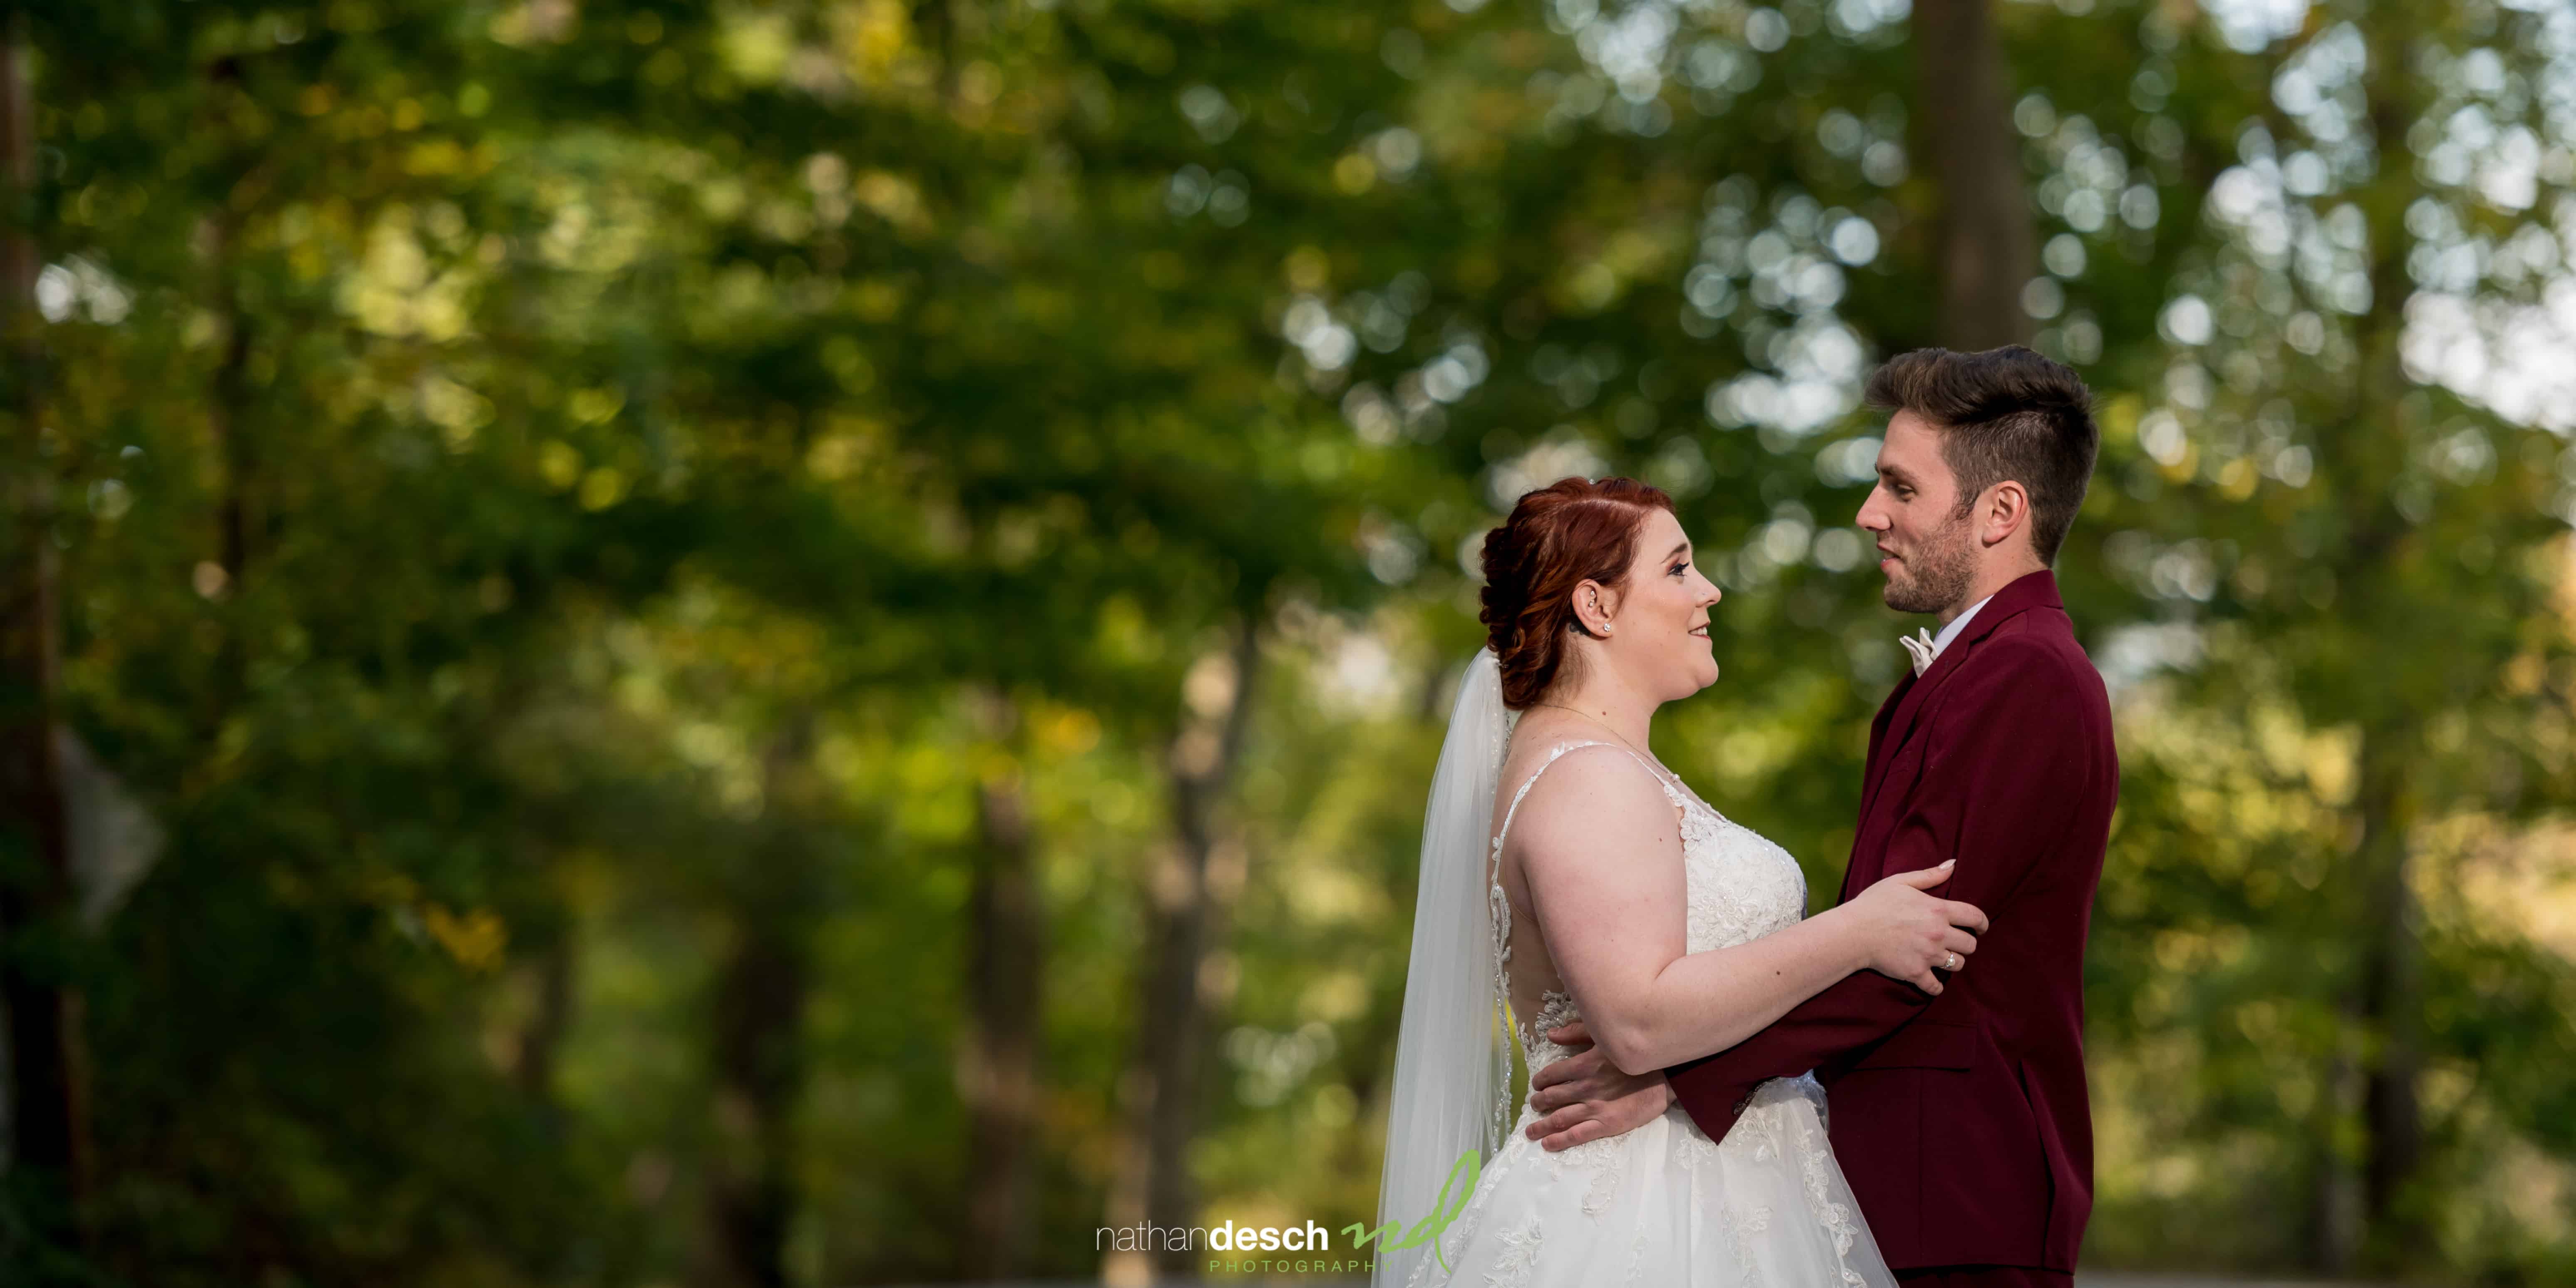 Pictures from Liberty Mountain Resort Wedding